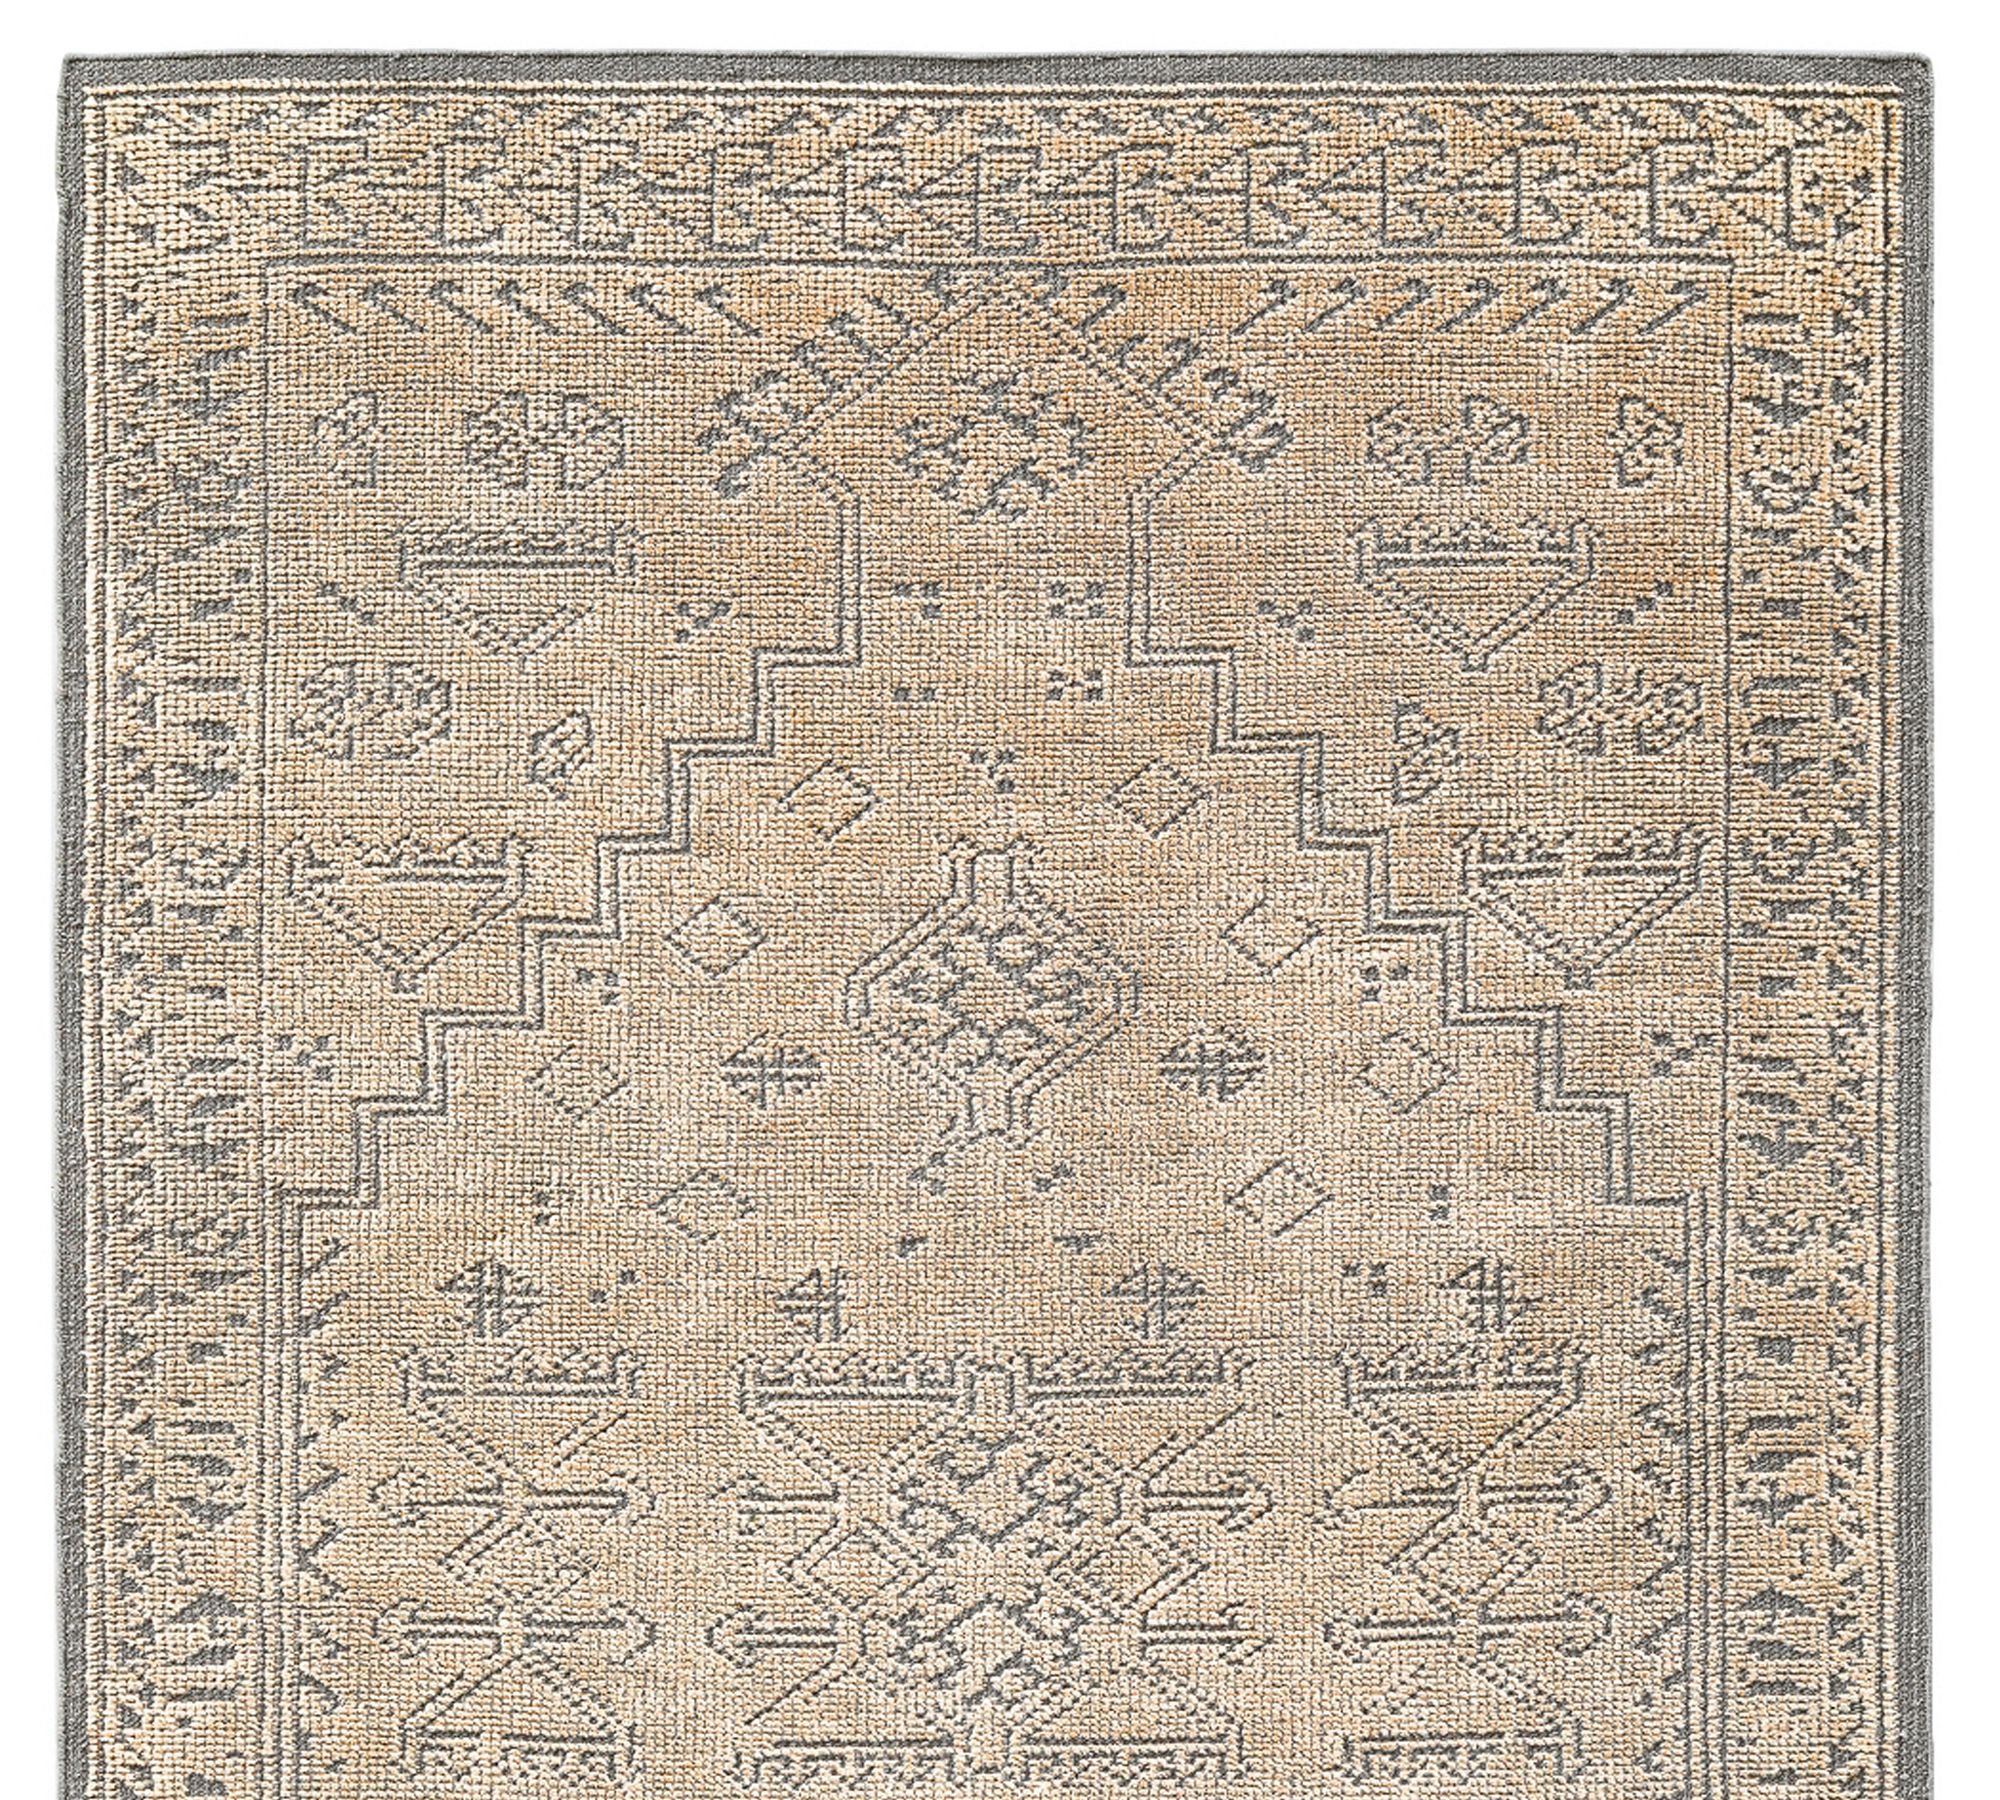 Luciana Handknotted Rug Swatch - Free Returns Within 30 Days